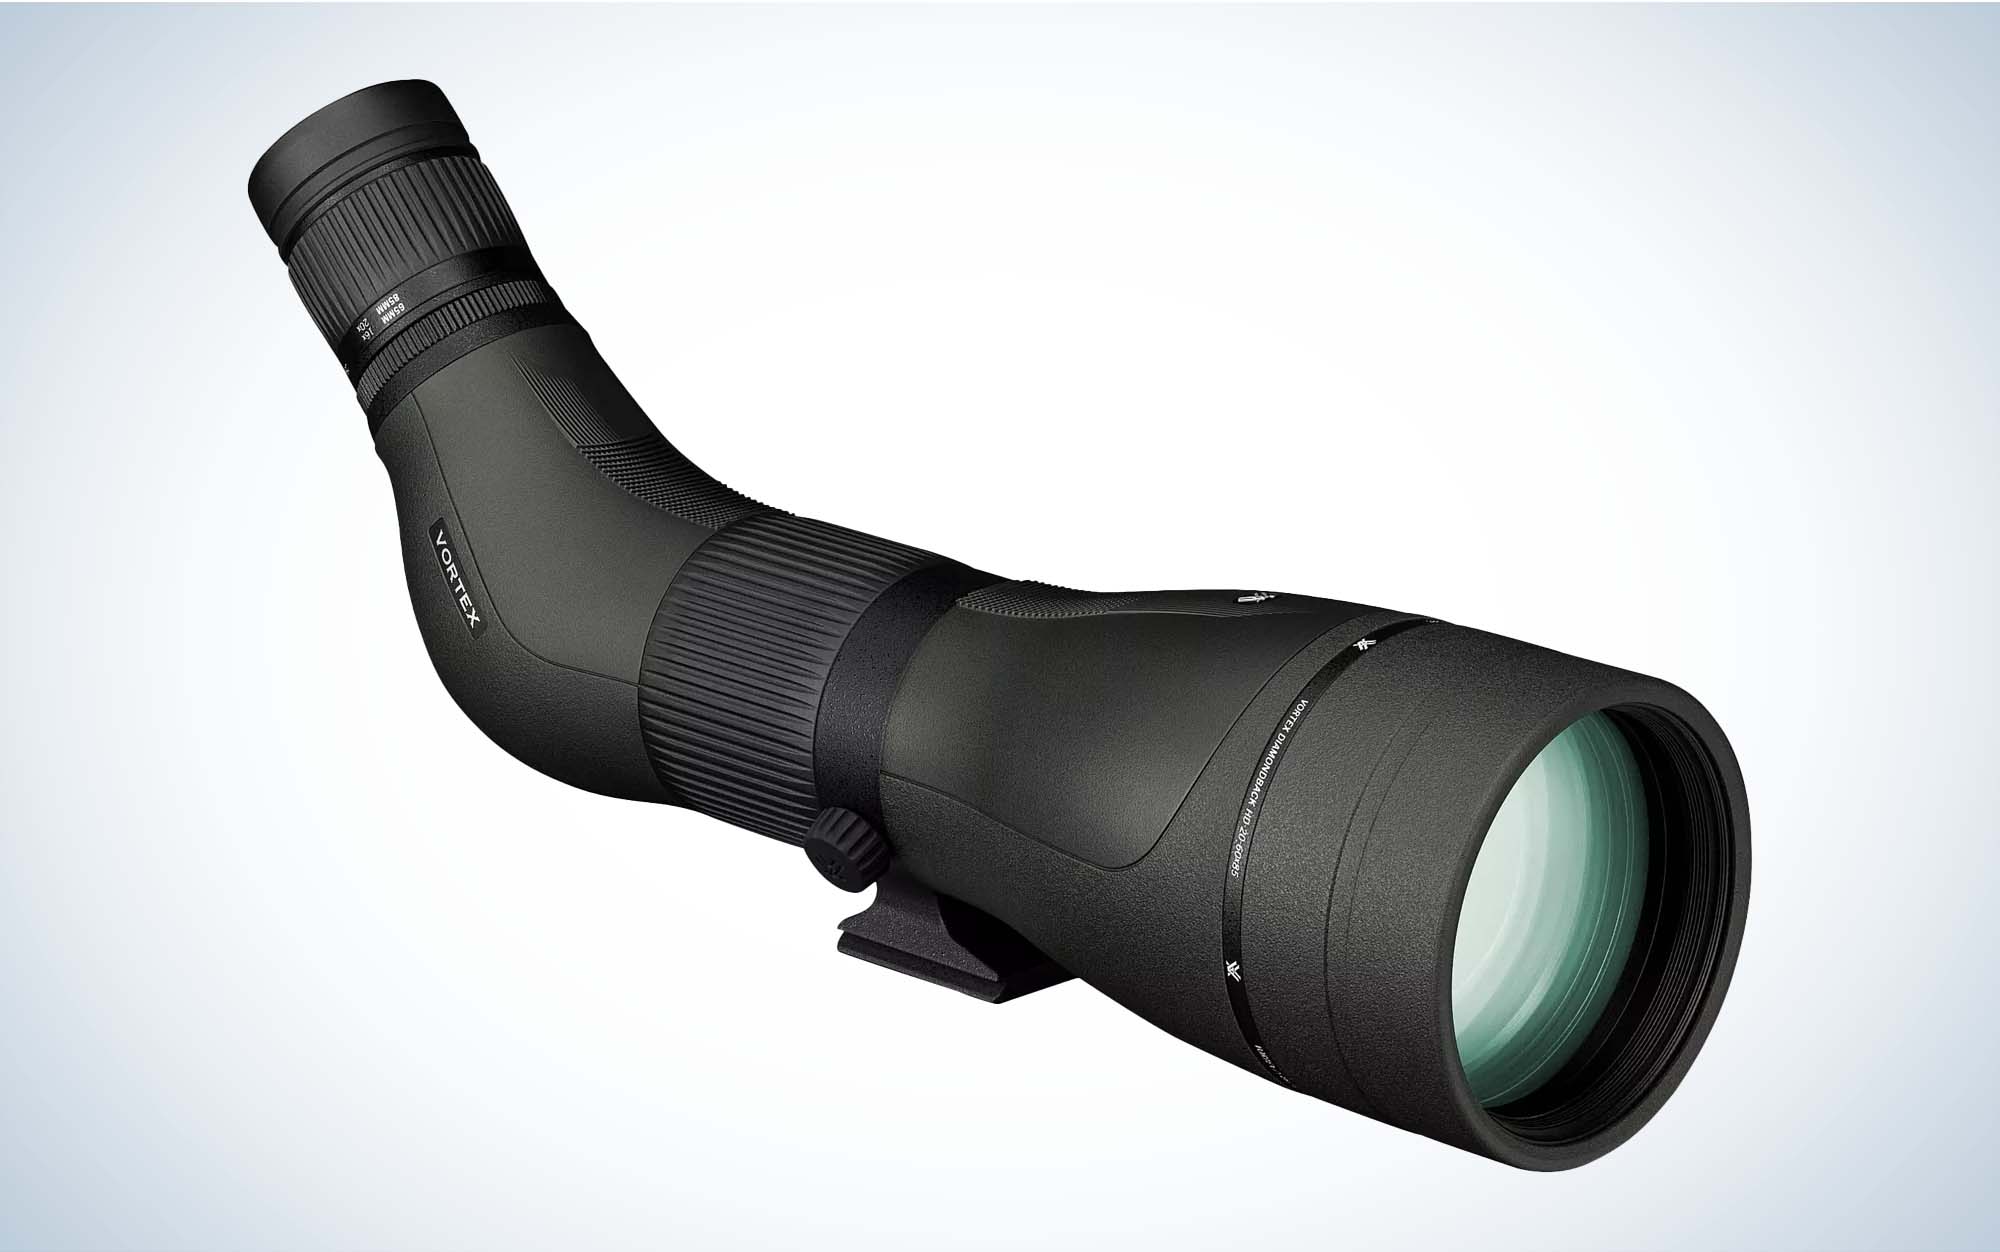 A durable and versatile scope for a fraction of premium scopes' price points.